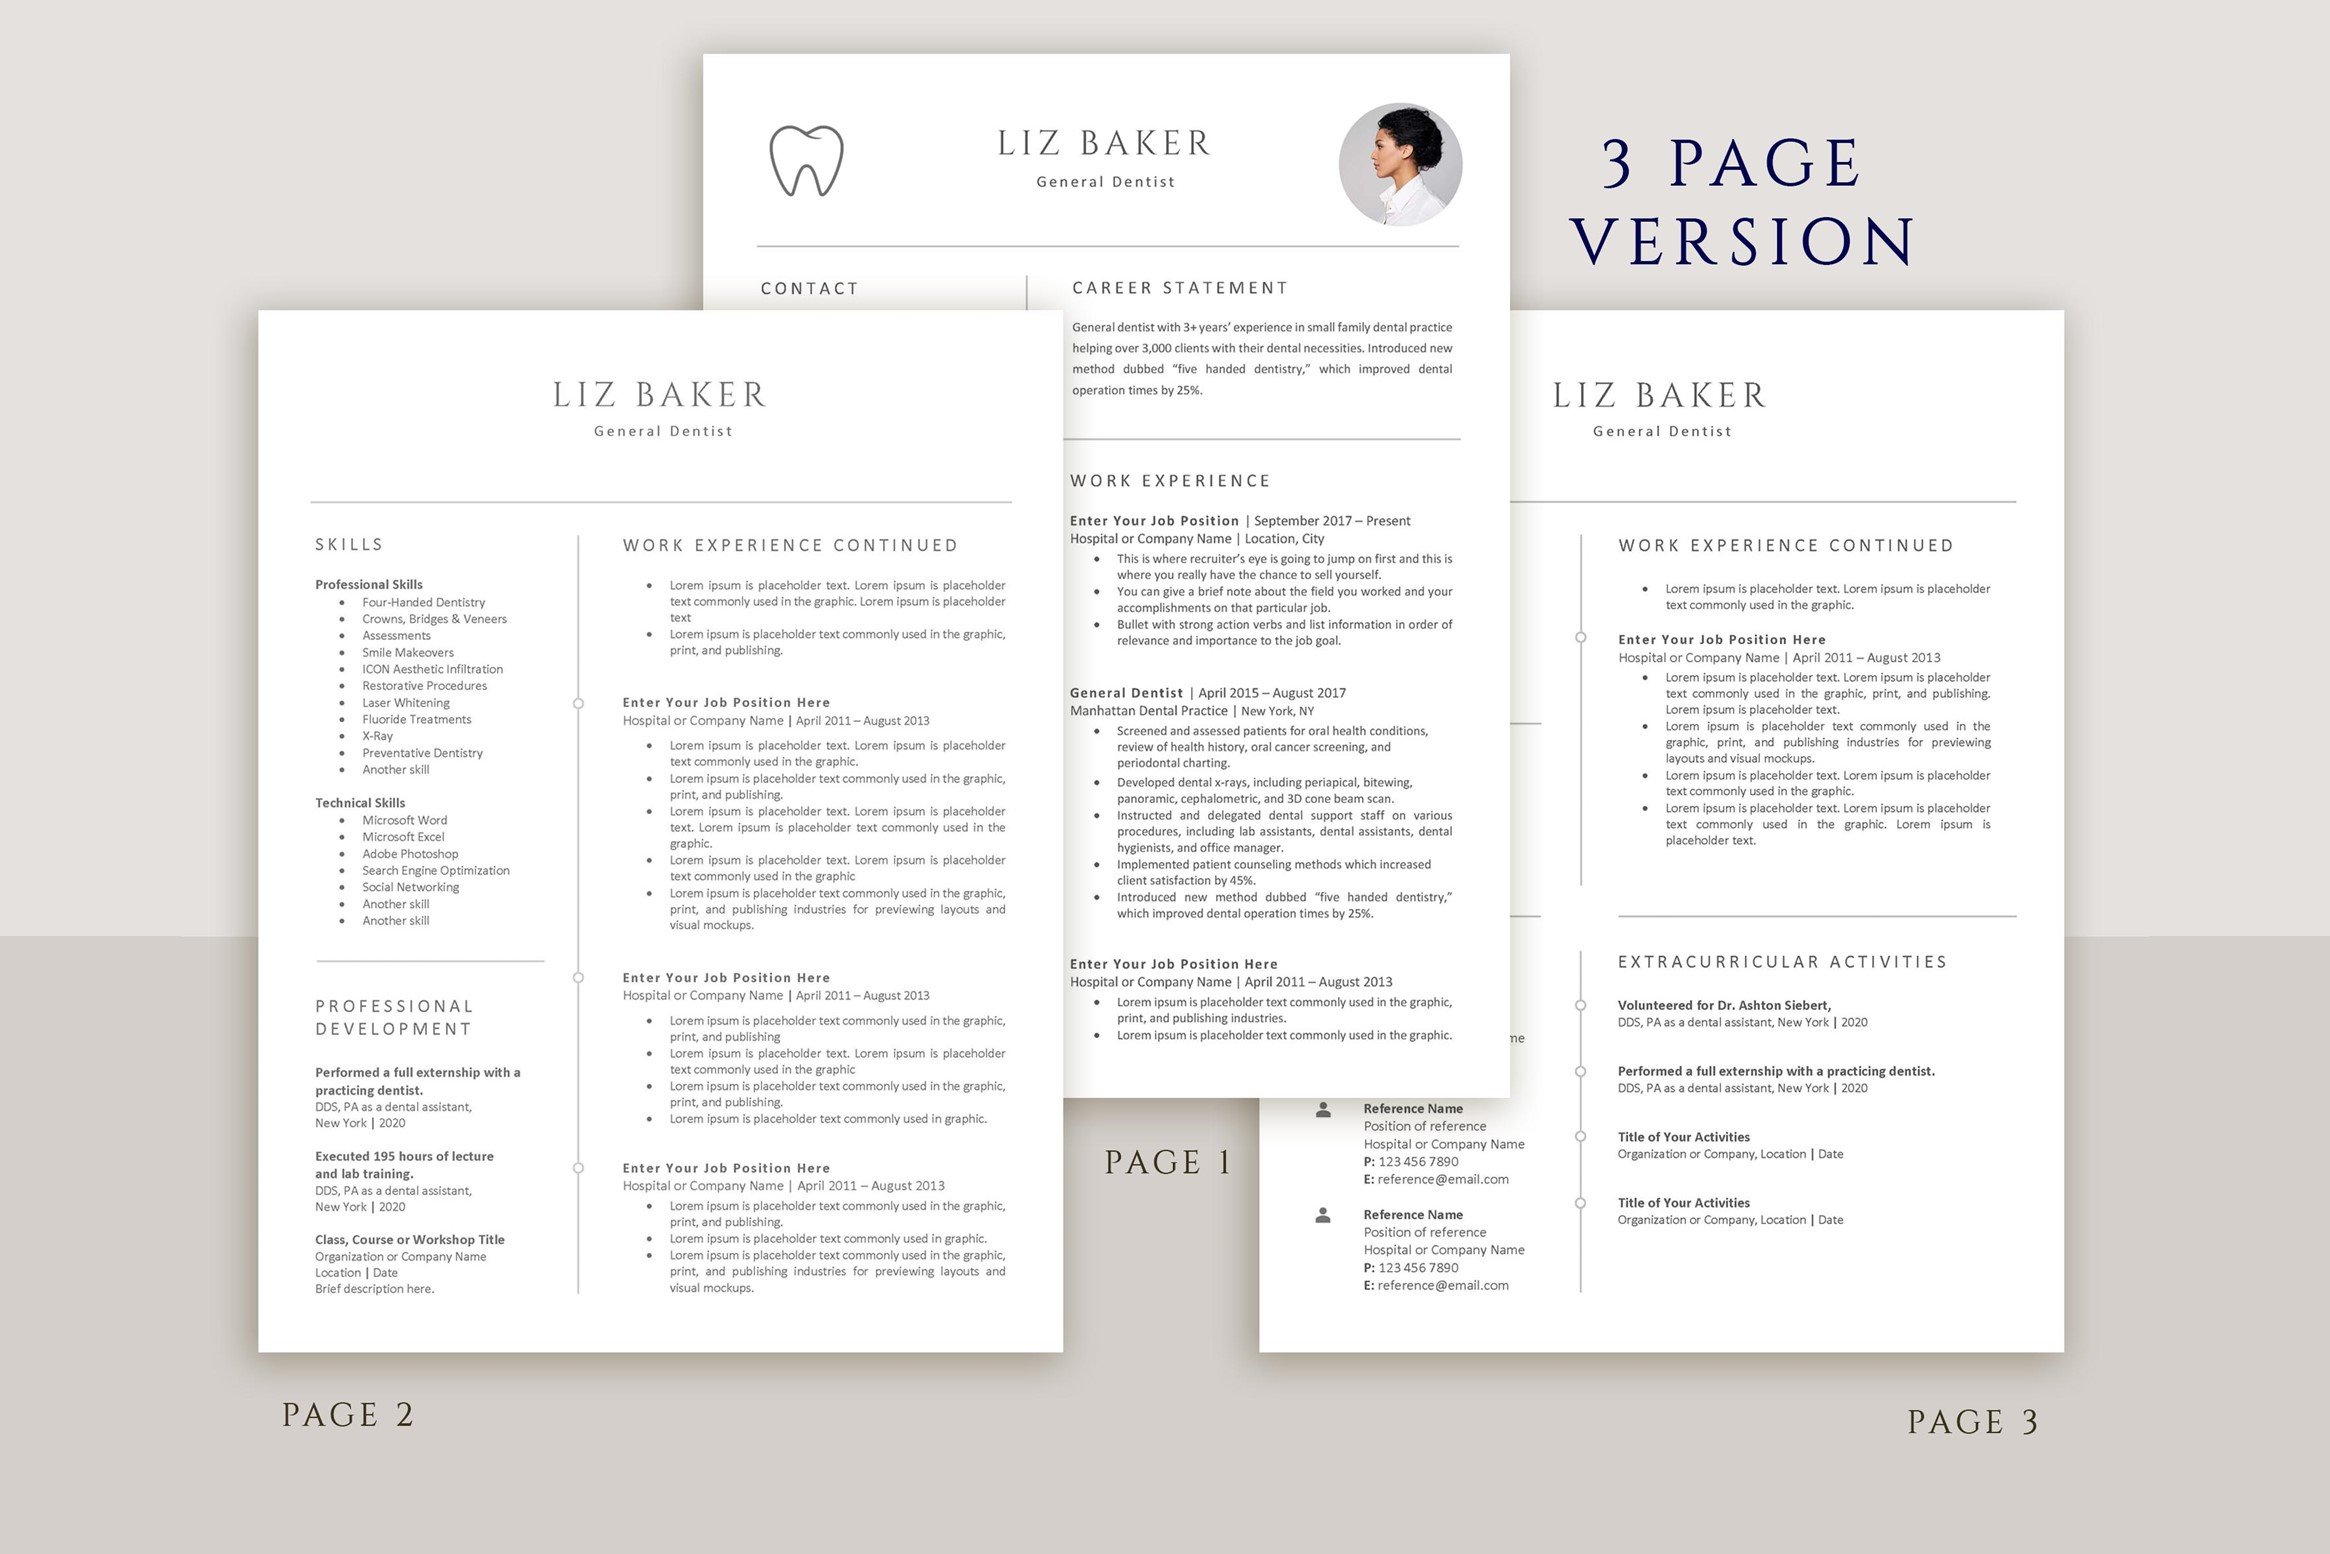 Three pages of a professional resume template.